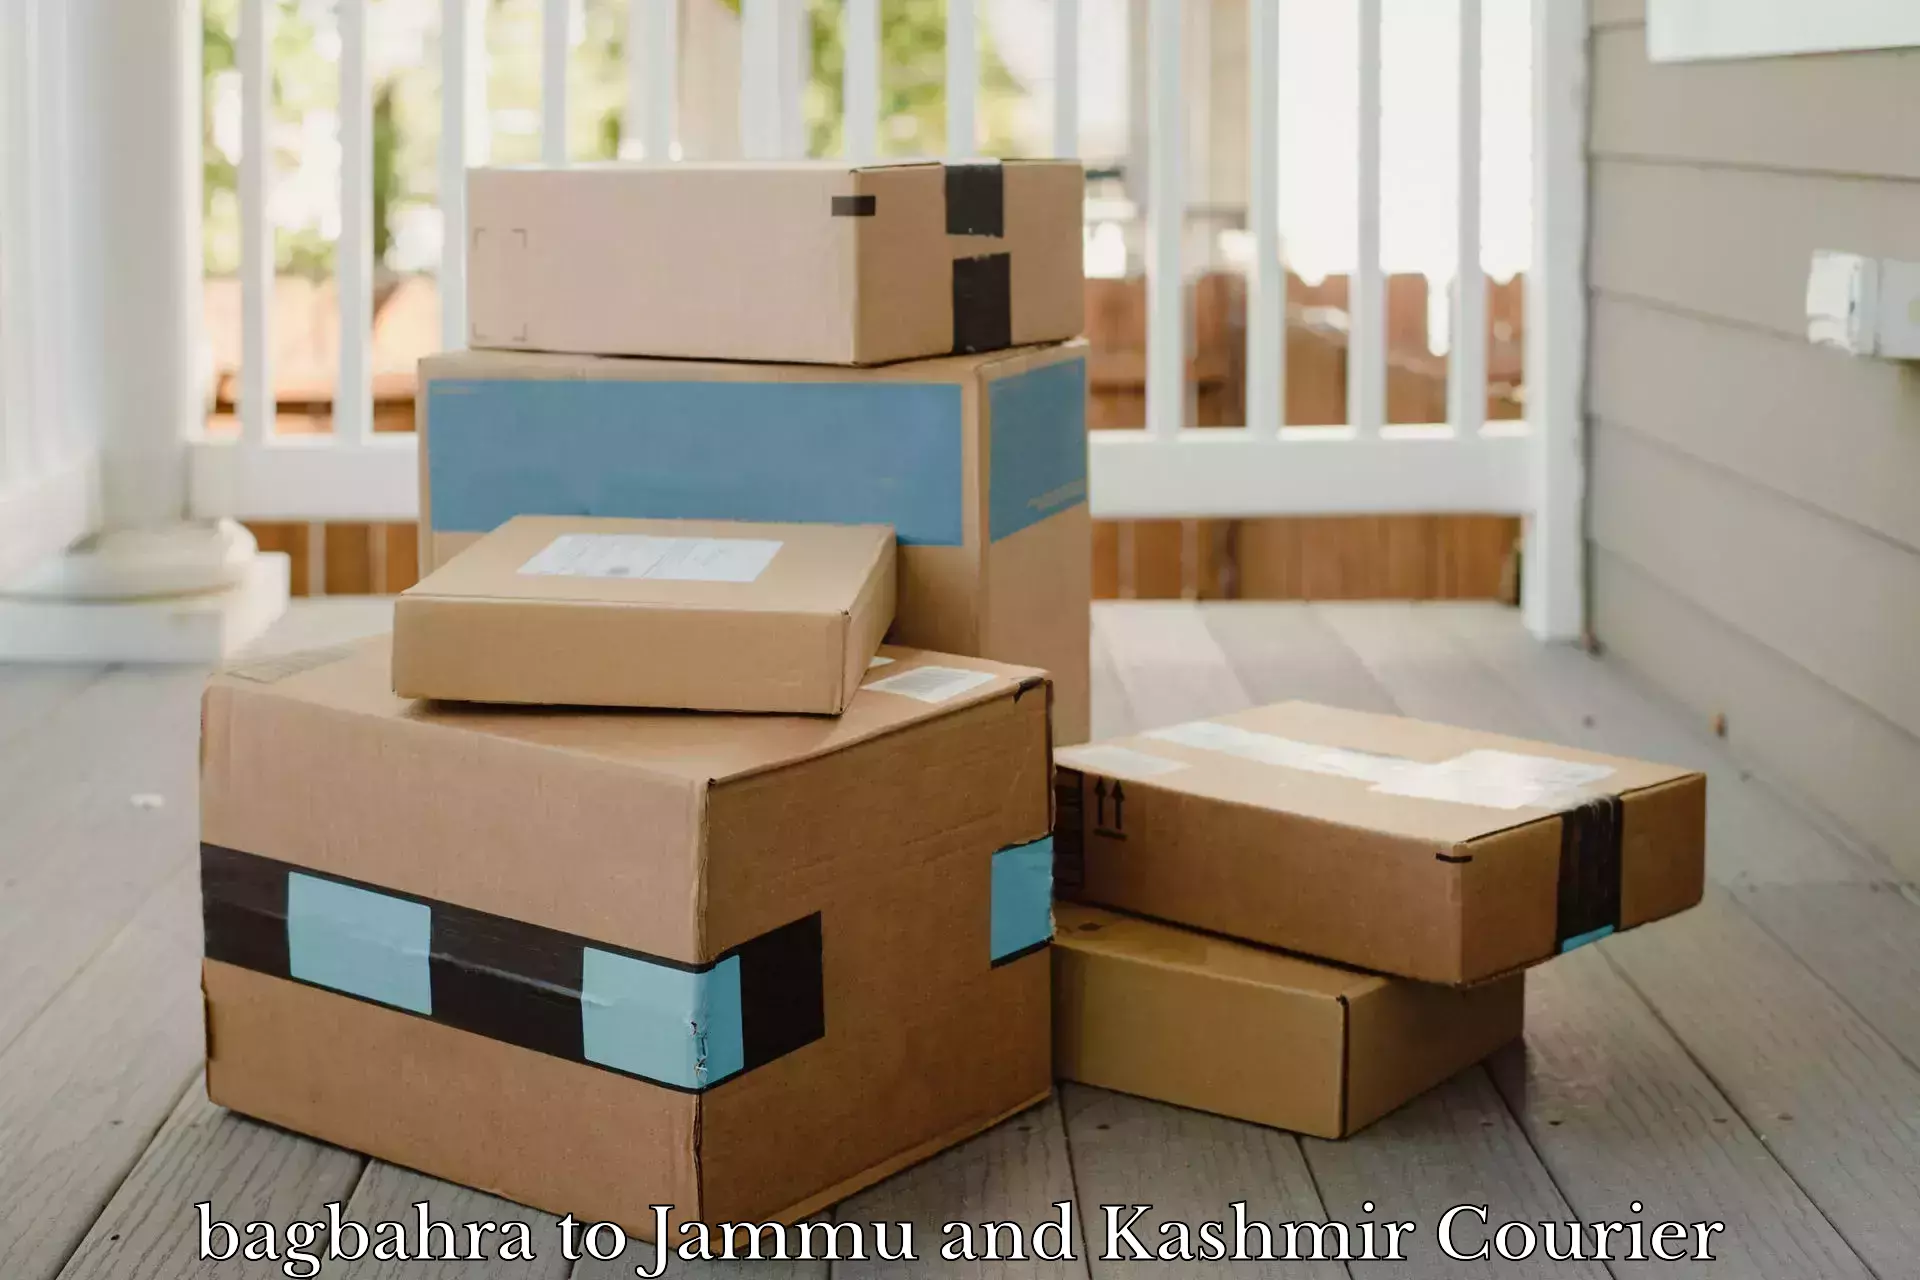 Efficient parcel service bagbahra to Pulwama